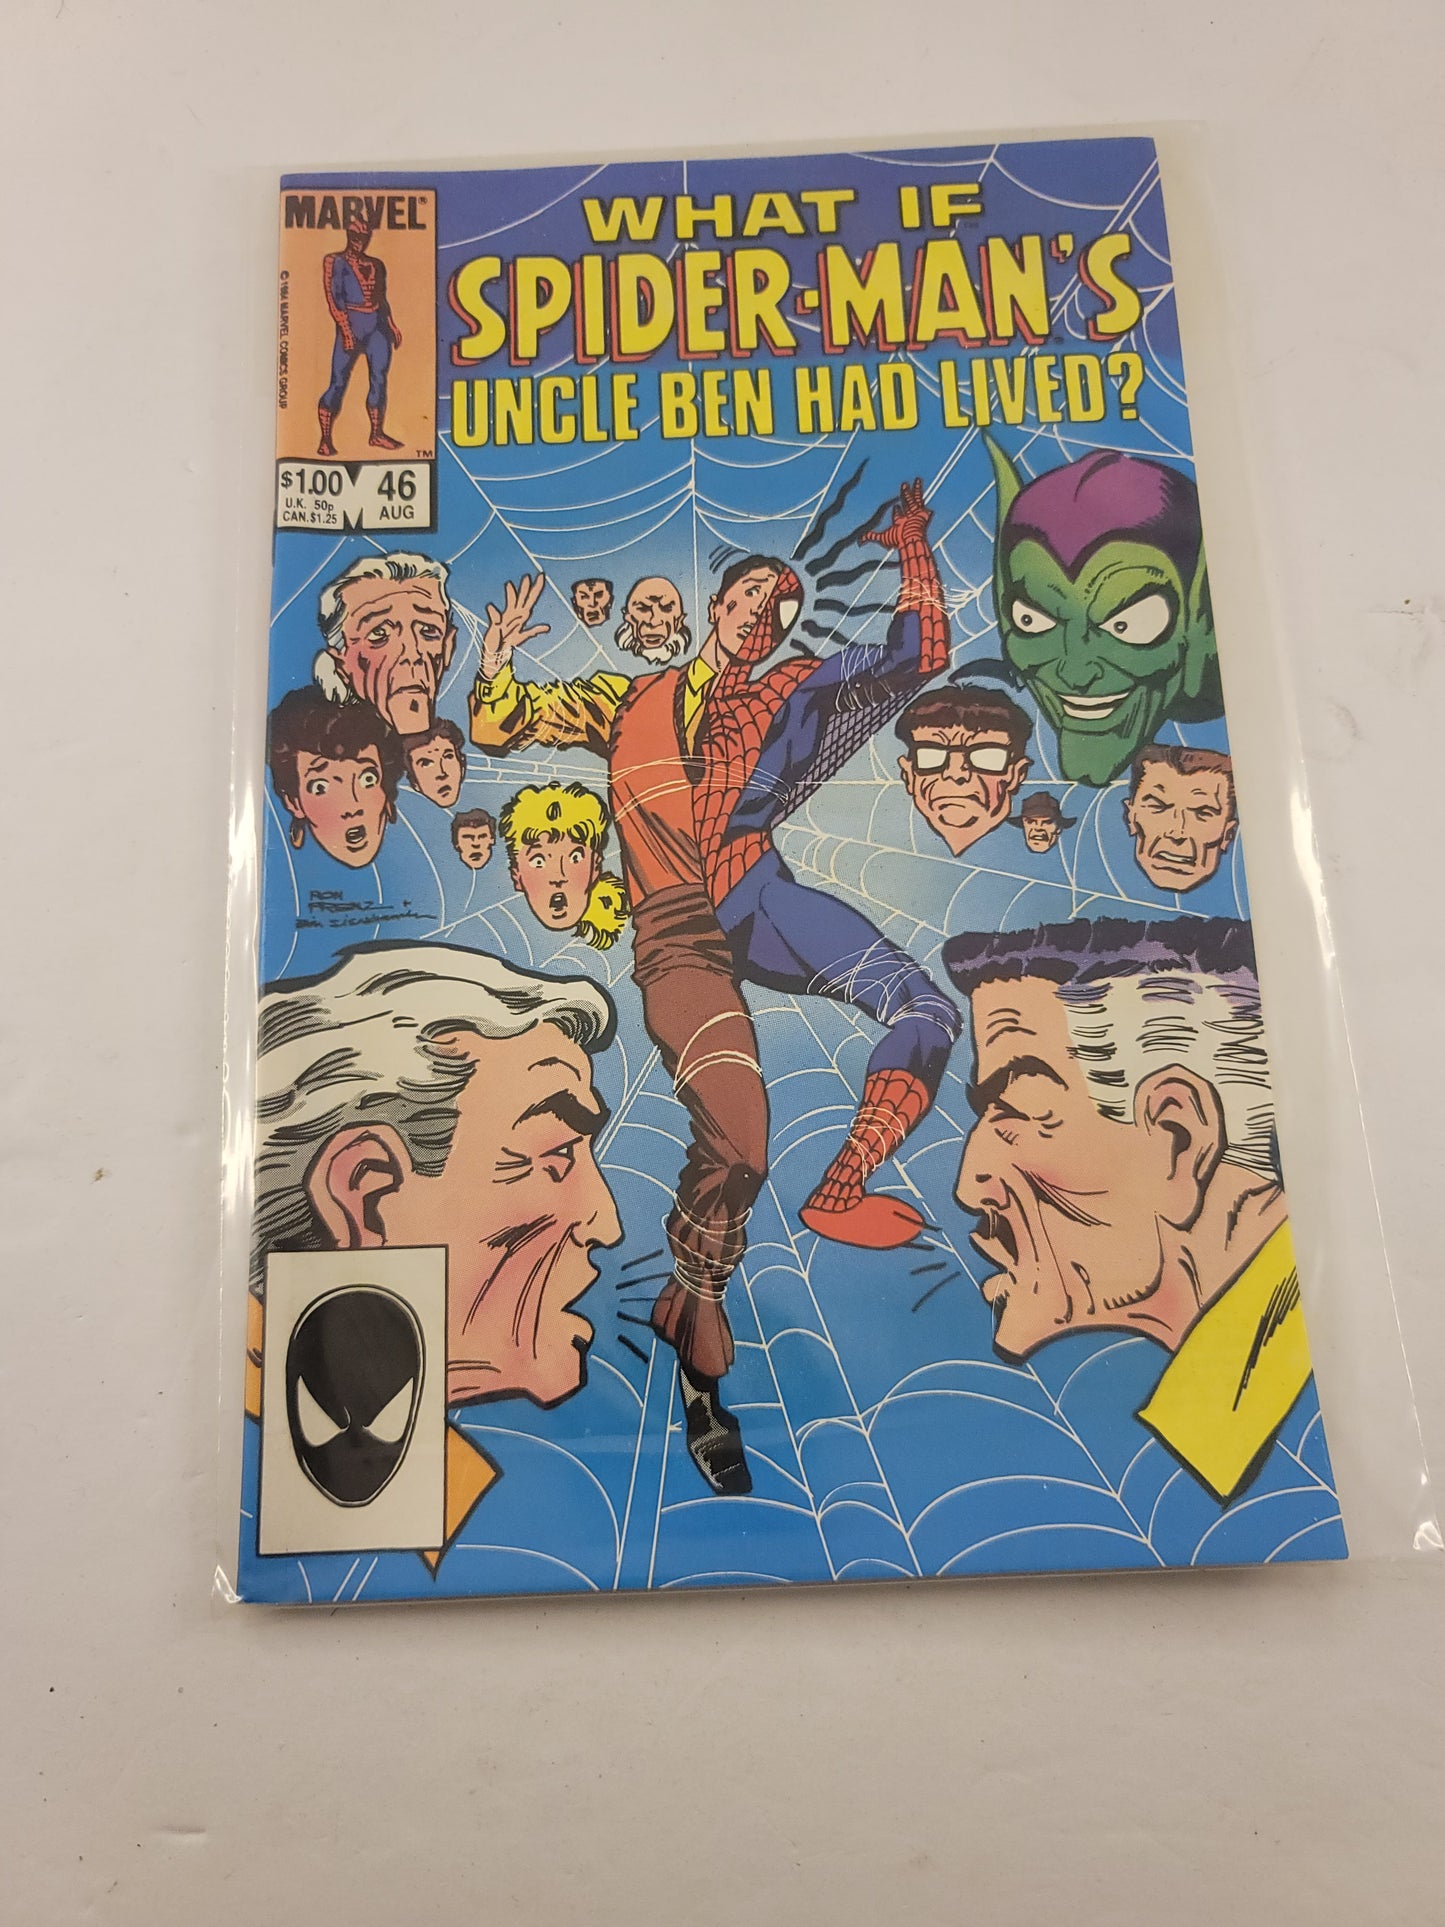 What If Spider-Man's Uncle Ben Had Lived Volume 1 Issue 46 (August 1984) Marvel Comics